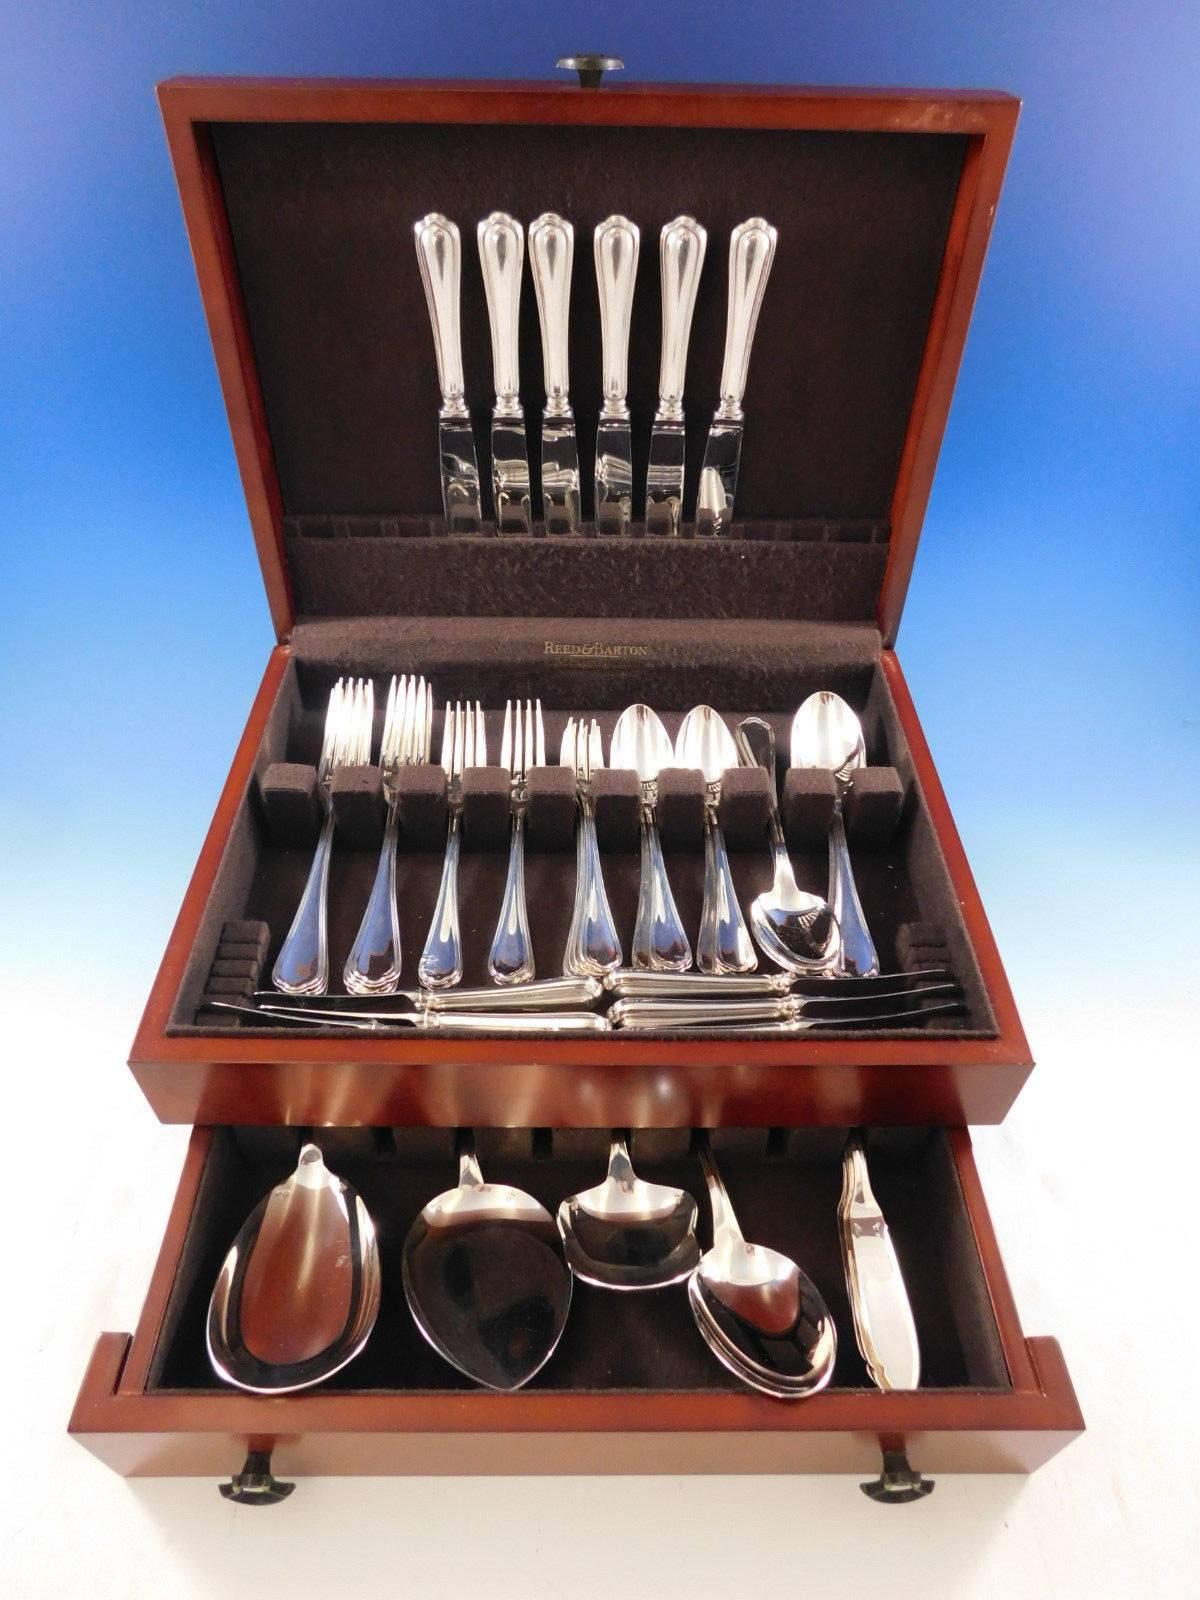 Spatours by Christofle France Silverplated Flatware set, 52 pieces. This set includes:

6 Regular Knives, 8 7/8"
6 Large Dinner Forks, 8 1/8"
6 Salad/Fish Forks, 6 7/8"
6 Large Teaspoons/Dessert Spoons, 6 5/8"
6 Place Soup